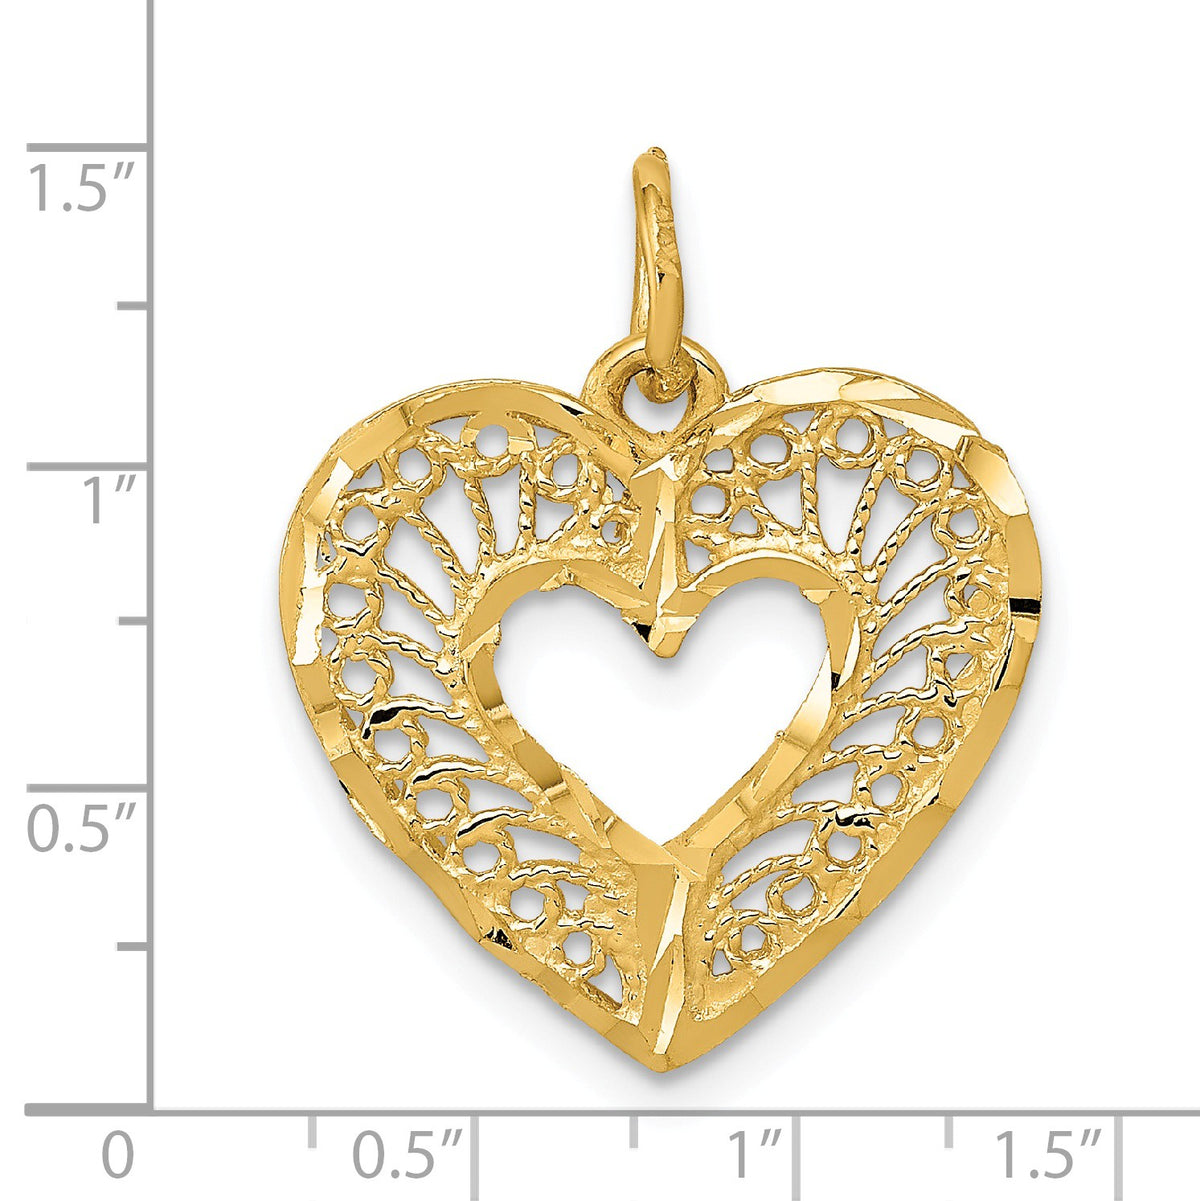 Alternate view of the 14k Yellow Gold Diamond Cut Filigree Heart Charm or Pendant, 17mm by The Black Bow Jewelry Co.